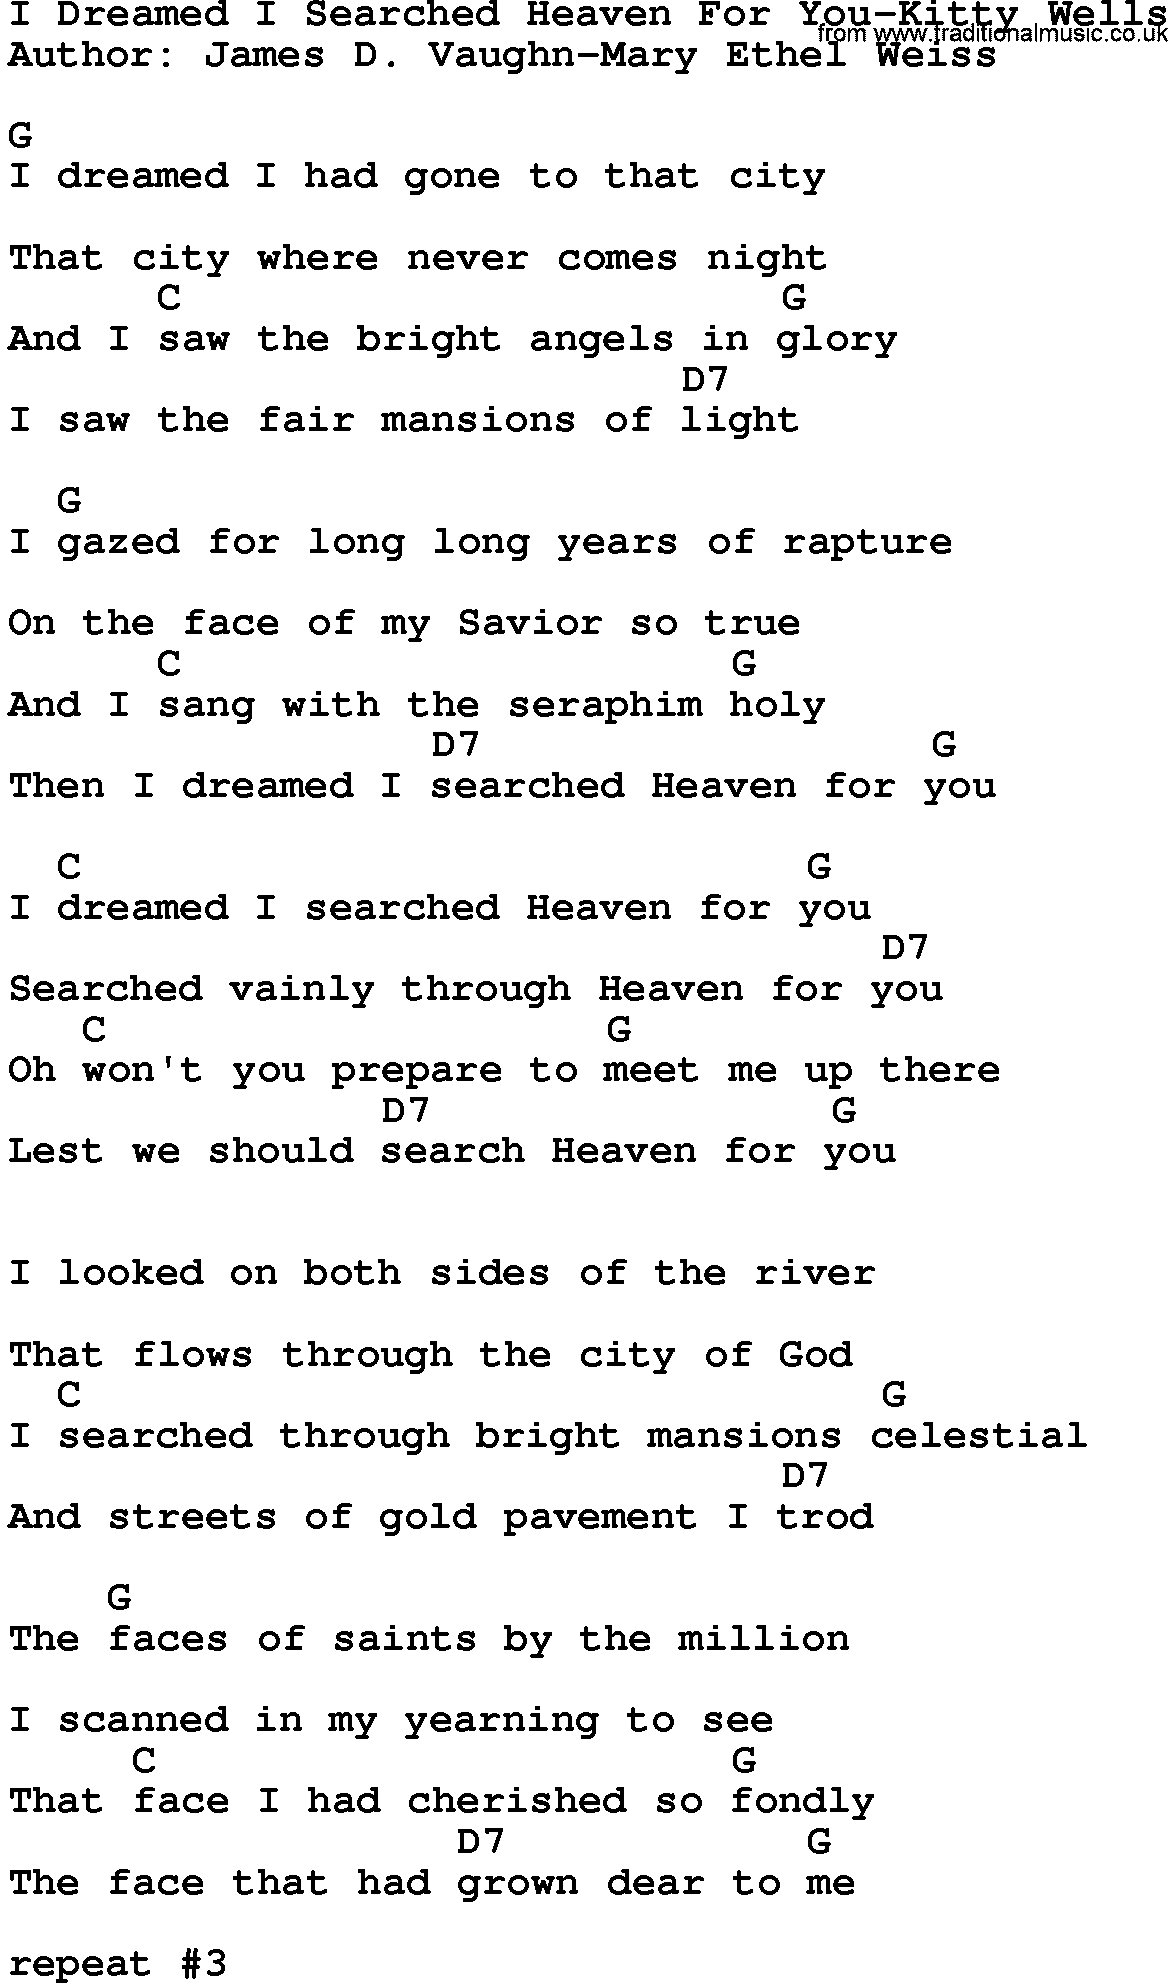 Country music song: I Dreamed I Searched Heaven For You-Kitty Wells lyrics and chords